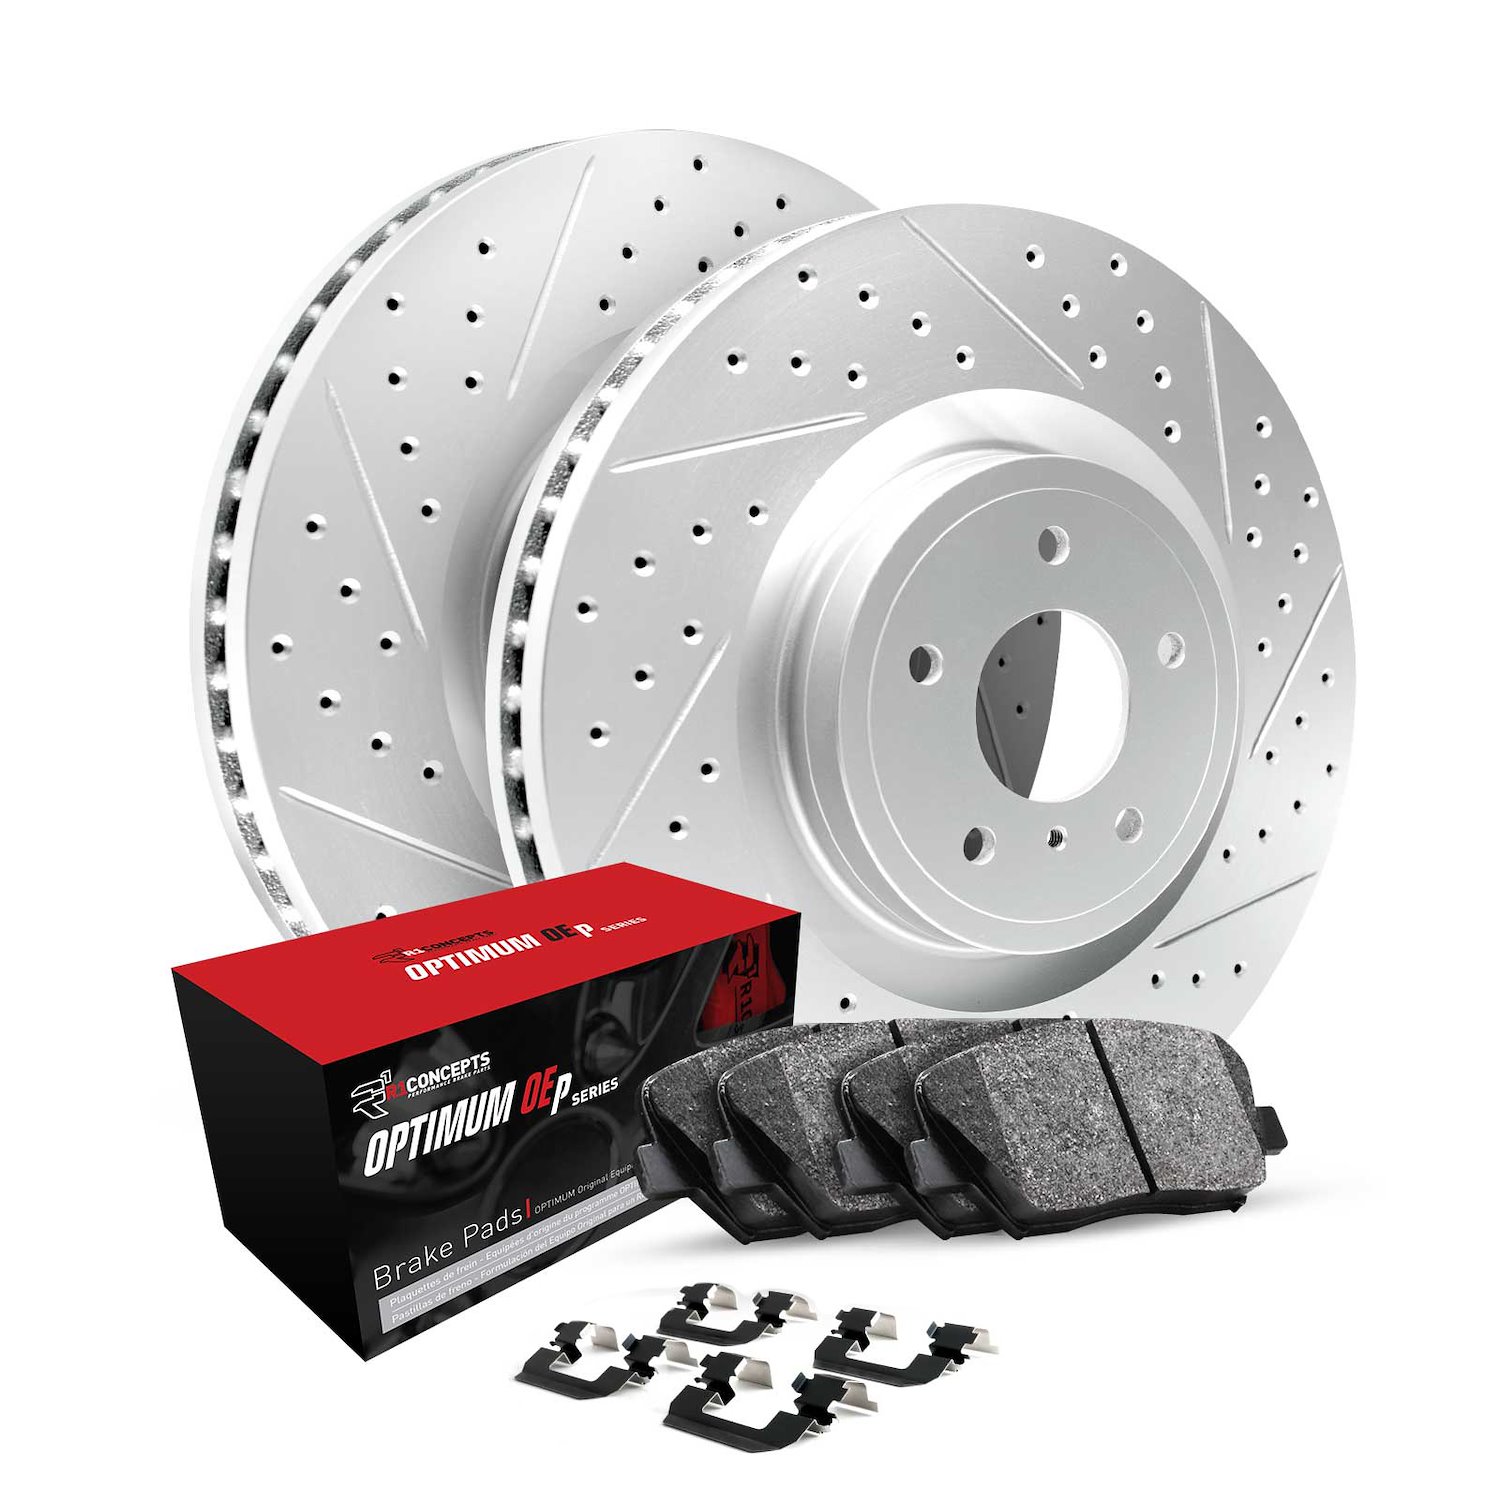 GEO-Carbon Drilled & Slotted Brake Rotor Set w/Optimum OE Pads & Hardware, 2007-2018 Fits Multiple Makes/Models